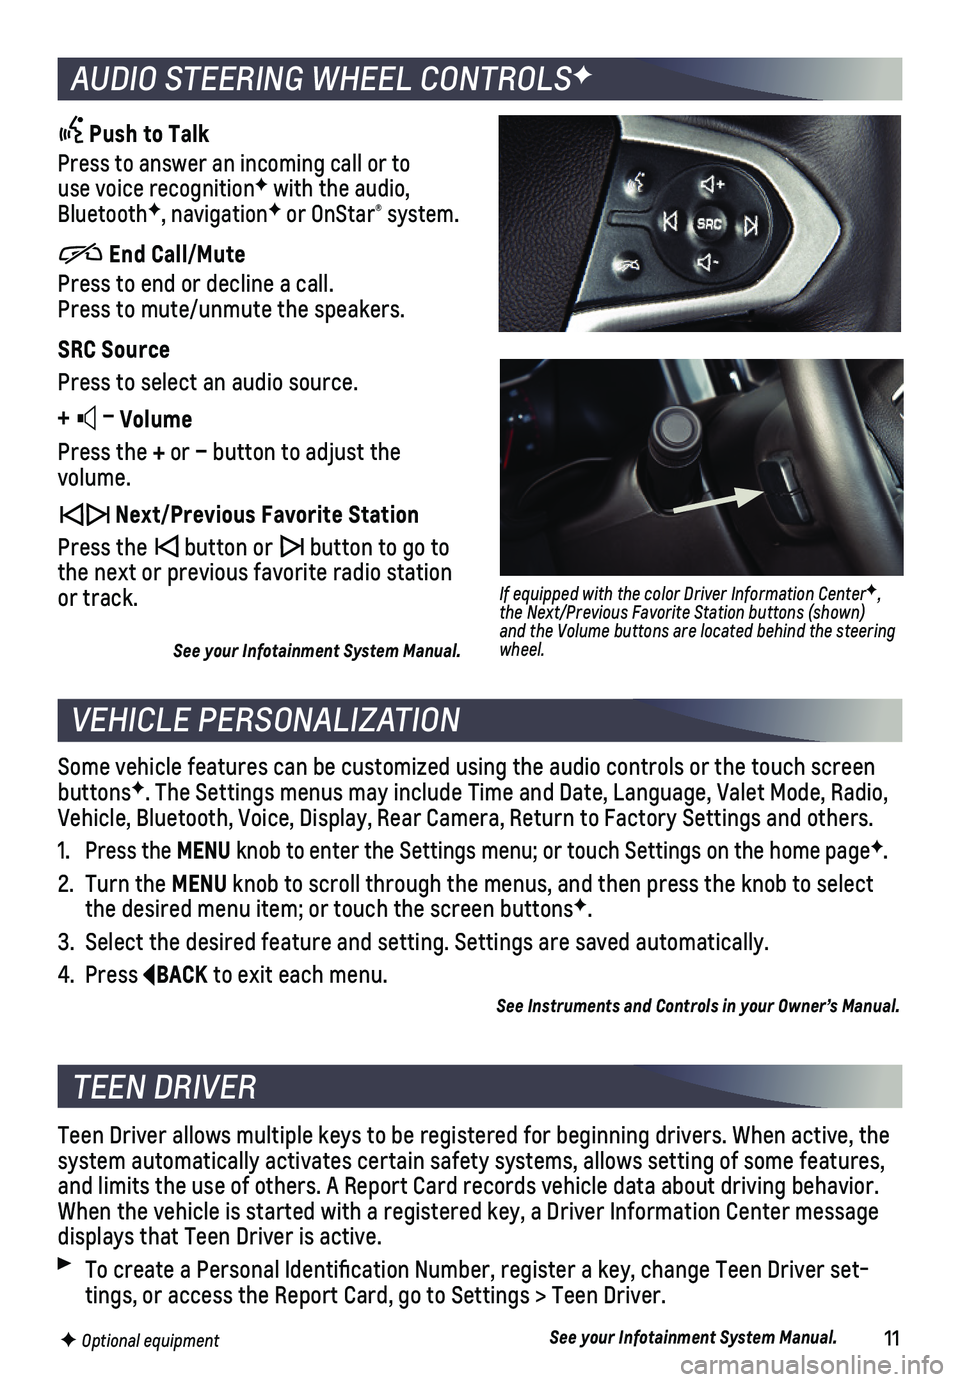 CHEVROLET COLORADO 2018  Get To Know Guide 11
AUDIO STEERING WHEEL CONTROLSF
VEHICLE PERSONALIZATION
 Push to Talk
Press to answer an incoming call or to  use voice recognitionF with the audio, BluetoothF, navigationF or OnStar® system.
     